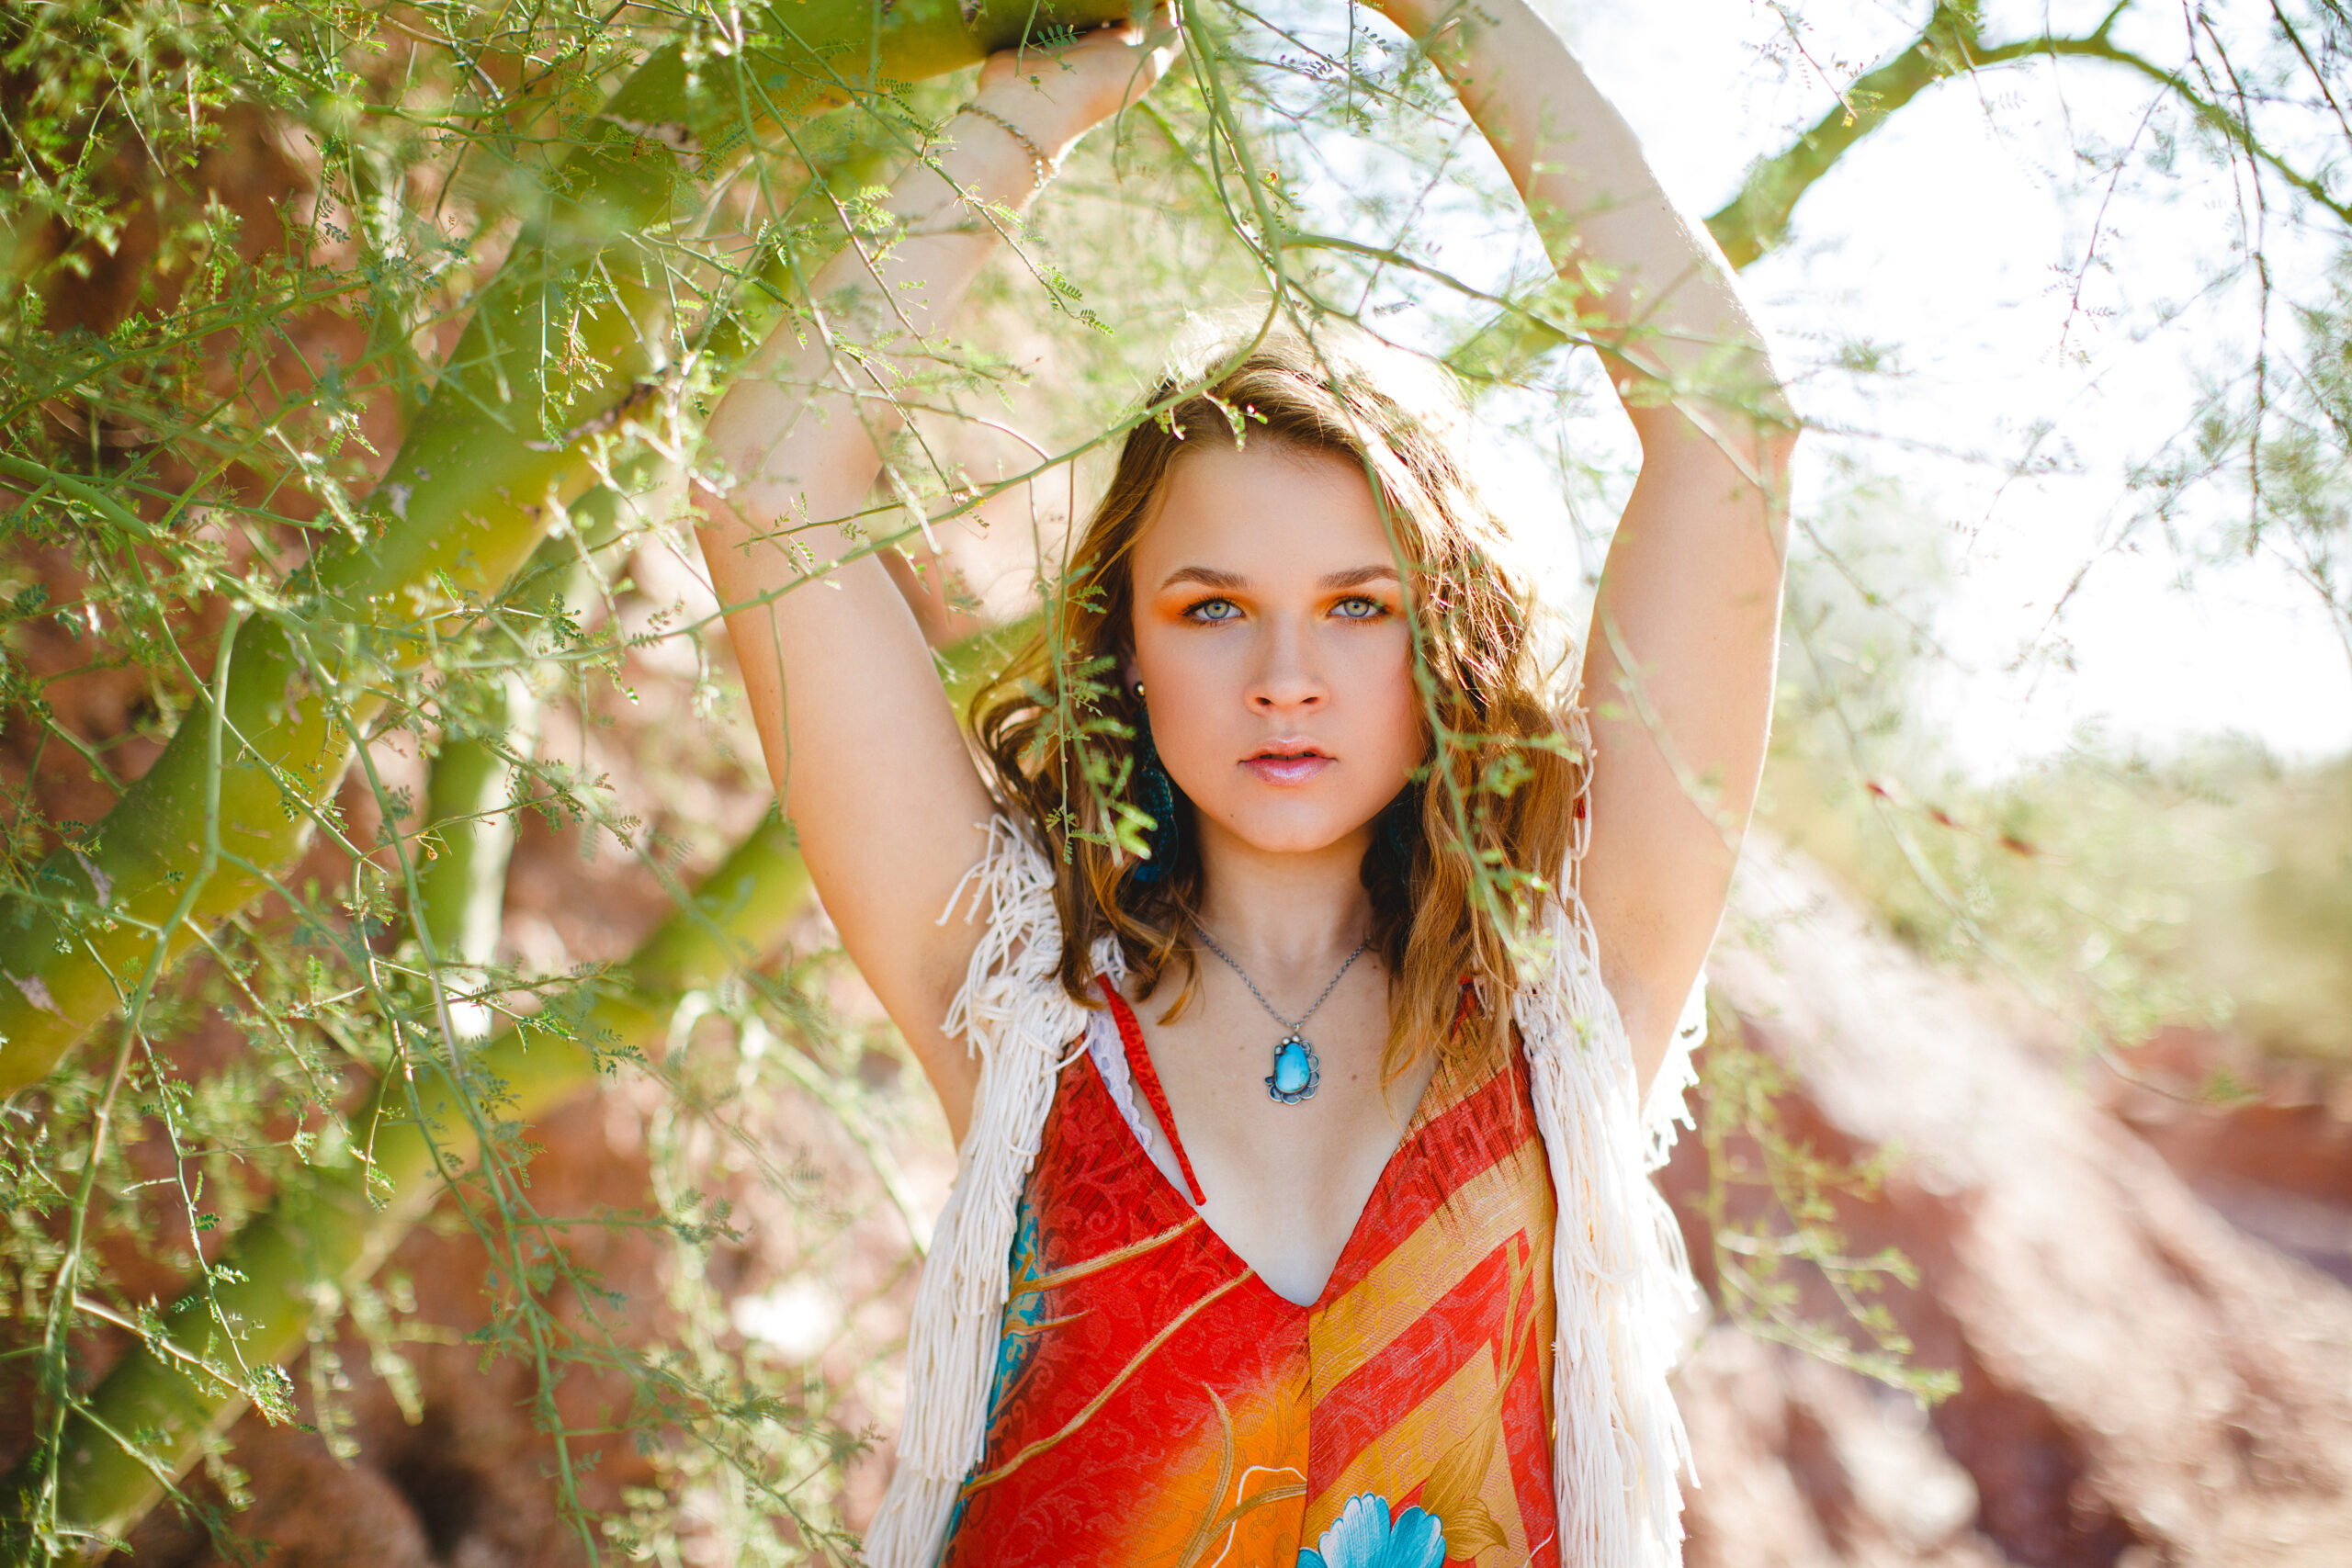 Abby posing in a bright colored jumpsuit and white macrame duster in the desert foliage with slice of lime.